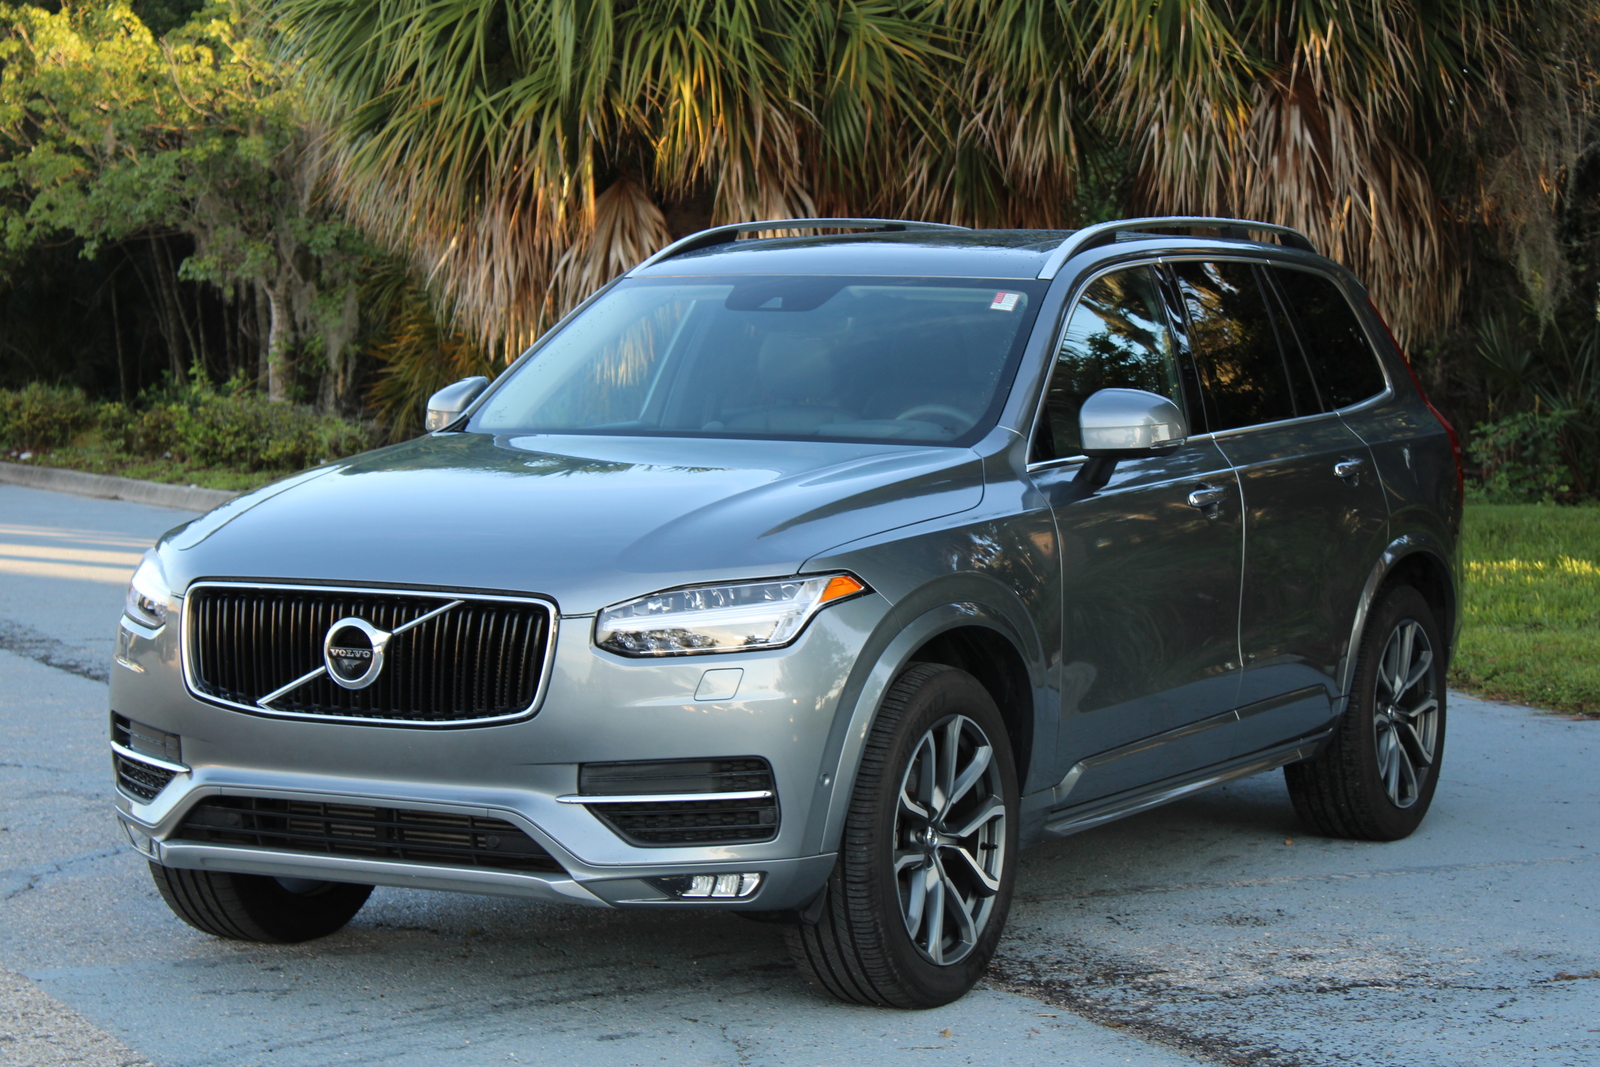 PreOwned 2016 Volvo XC90 T6 Momentum Sport Utility in Sarasota LR20513A Wilde Land Rover